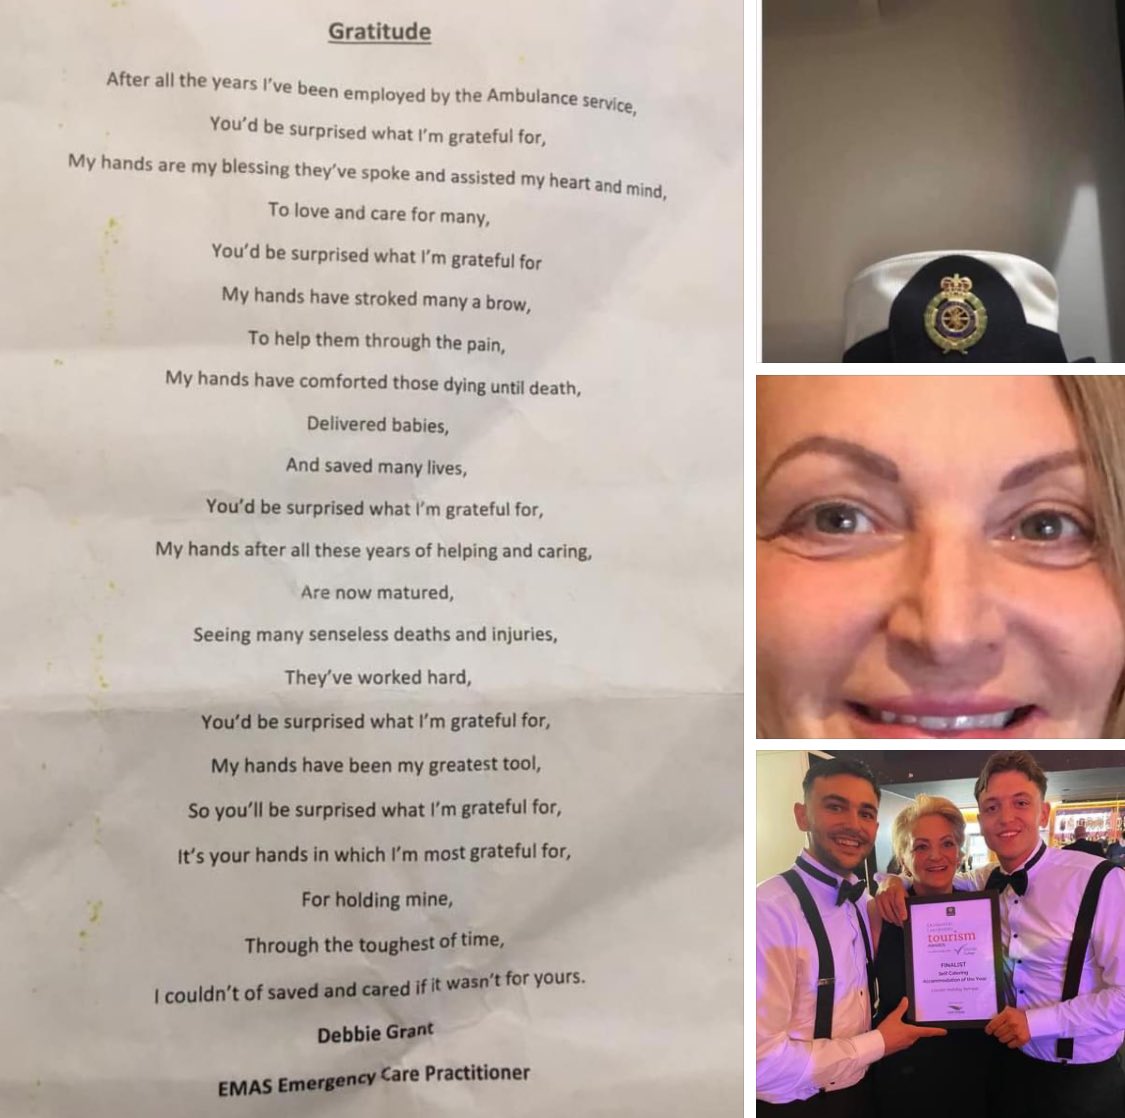 From Hospital to Hospitality Your in good hands with your host Debbie 💚❤️ #hospitalstohospitality #placethatcares #youreingoodhands #becauseyourworthit #greathost #LincsConnect #greathospitality